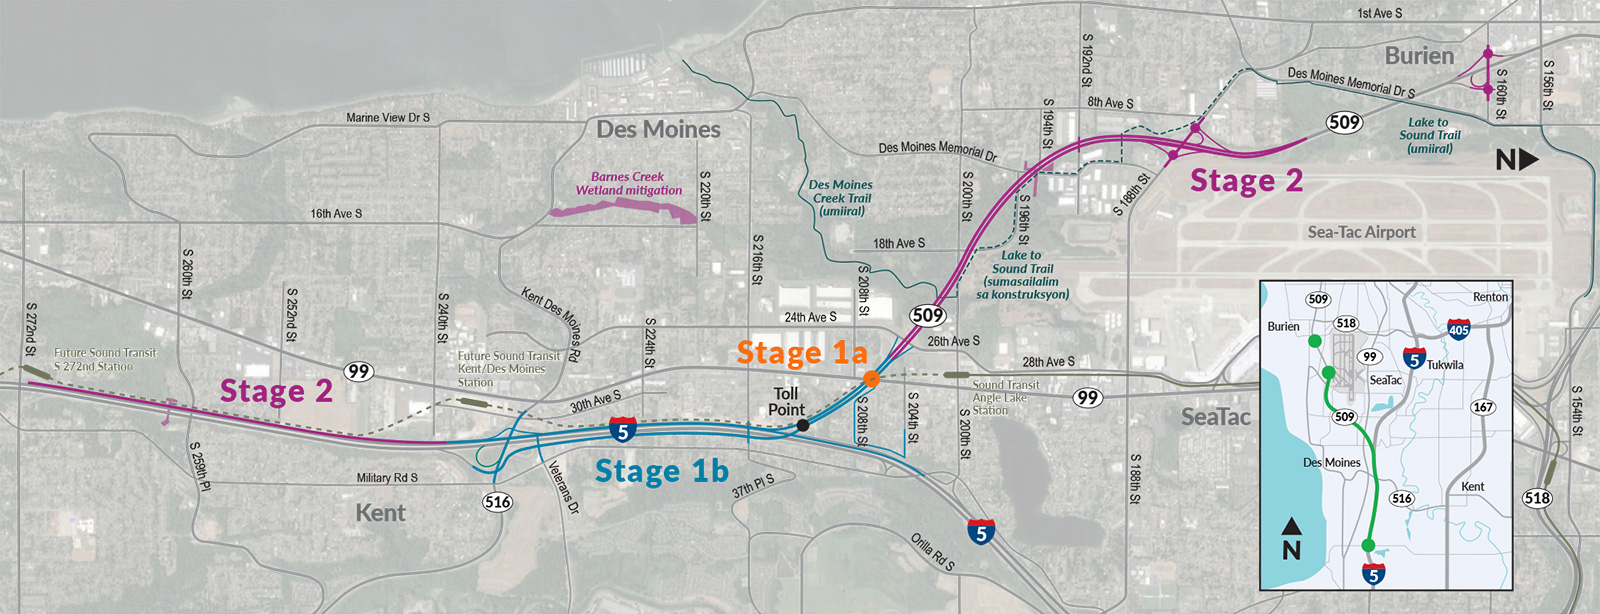 Map of SR 509 Completion Project broken out by project stage, all labels in Tagalog.